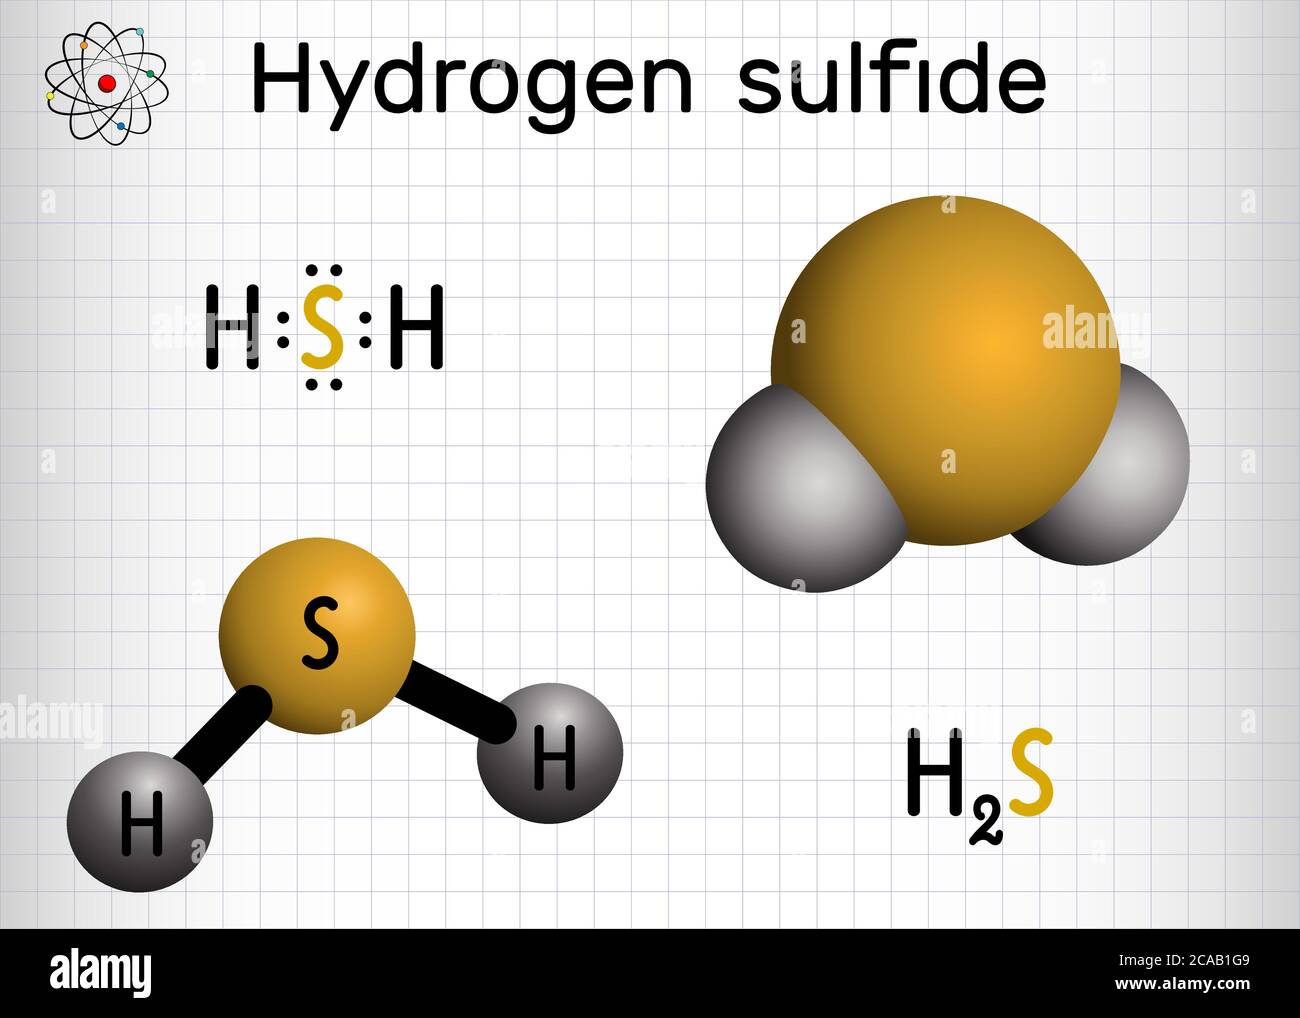 Hydrogen sulfide, hydrosulfuric acid, H2S molecule. It is highly toxic and flammable gas with foul odor of rotten eggs. Sheet of paper in a cage. Vect Stock Vector